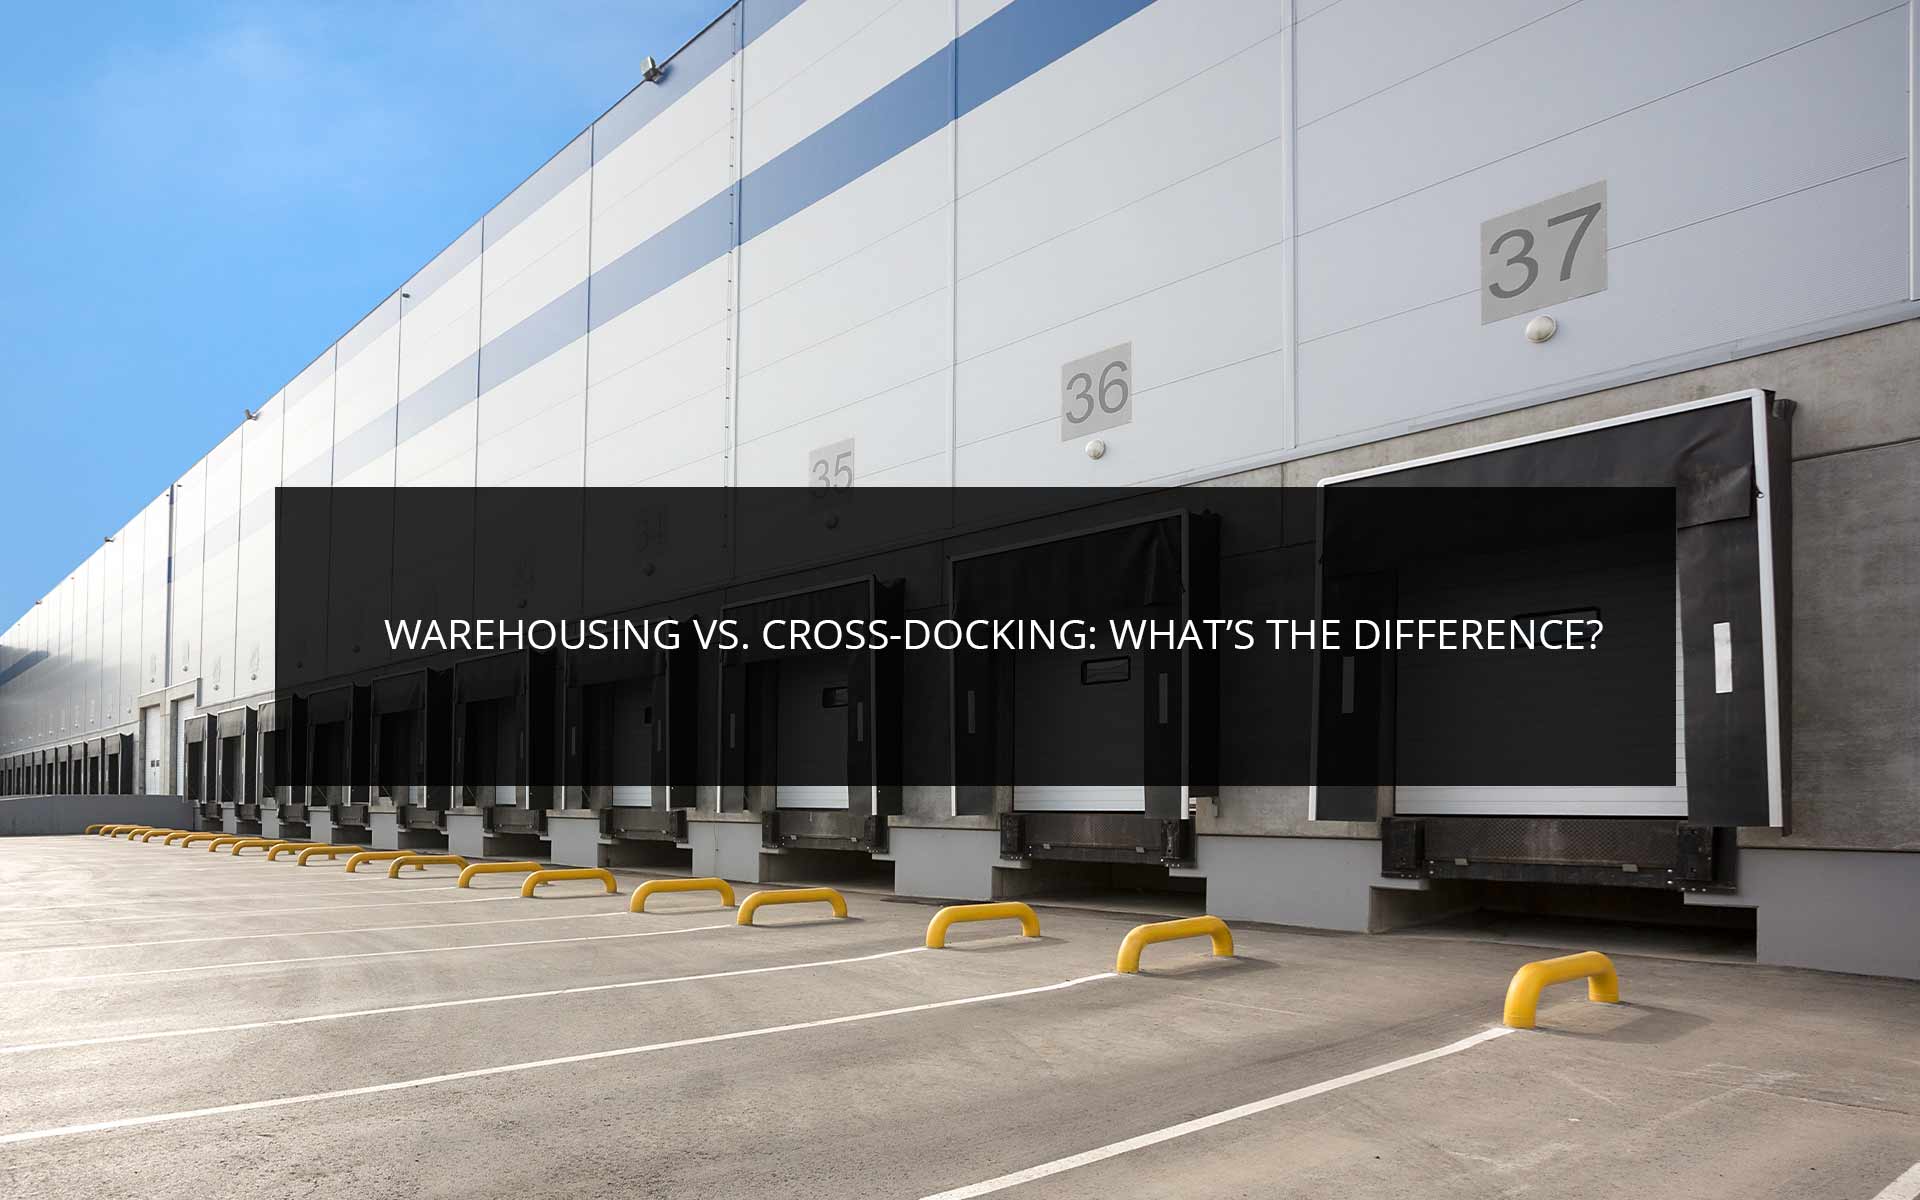 Warehousing vs. Cross-Docking: What’s the Difference?